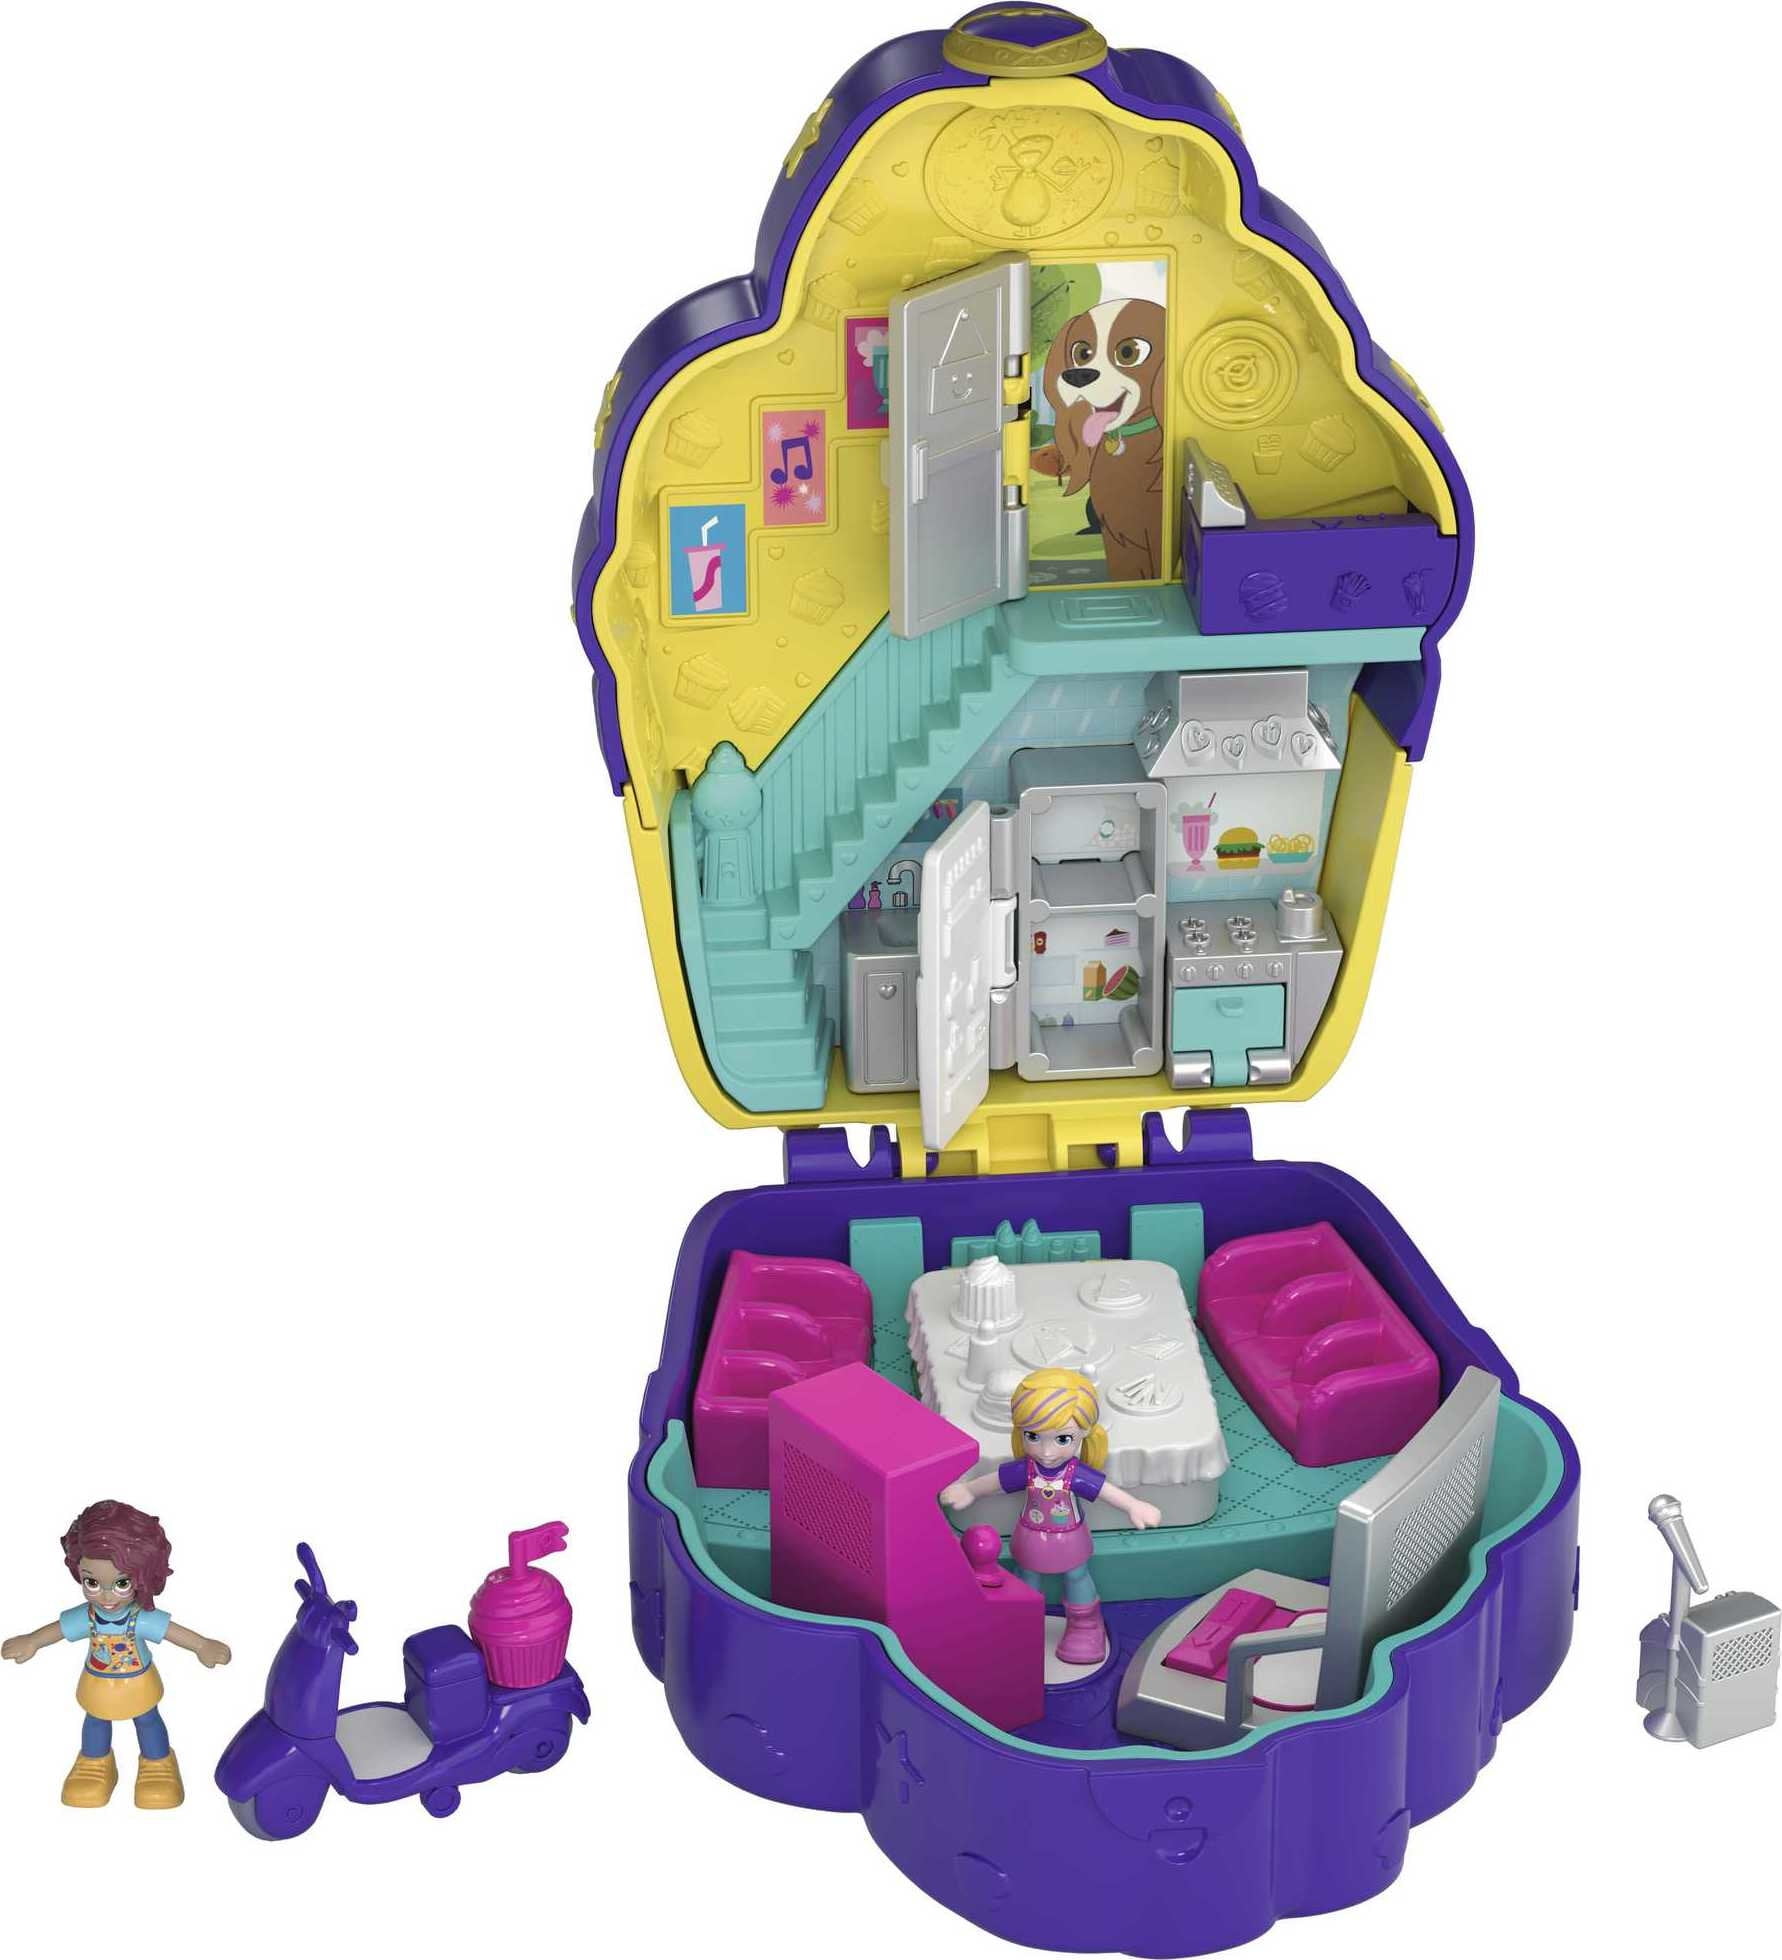 Polly Pocket World Shopping Mall Compact Purse PlaySet 